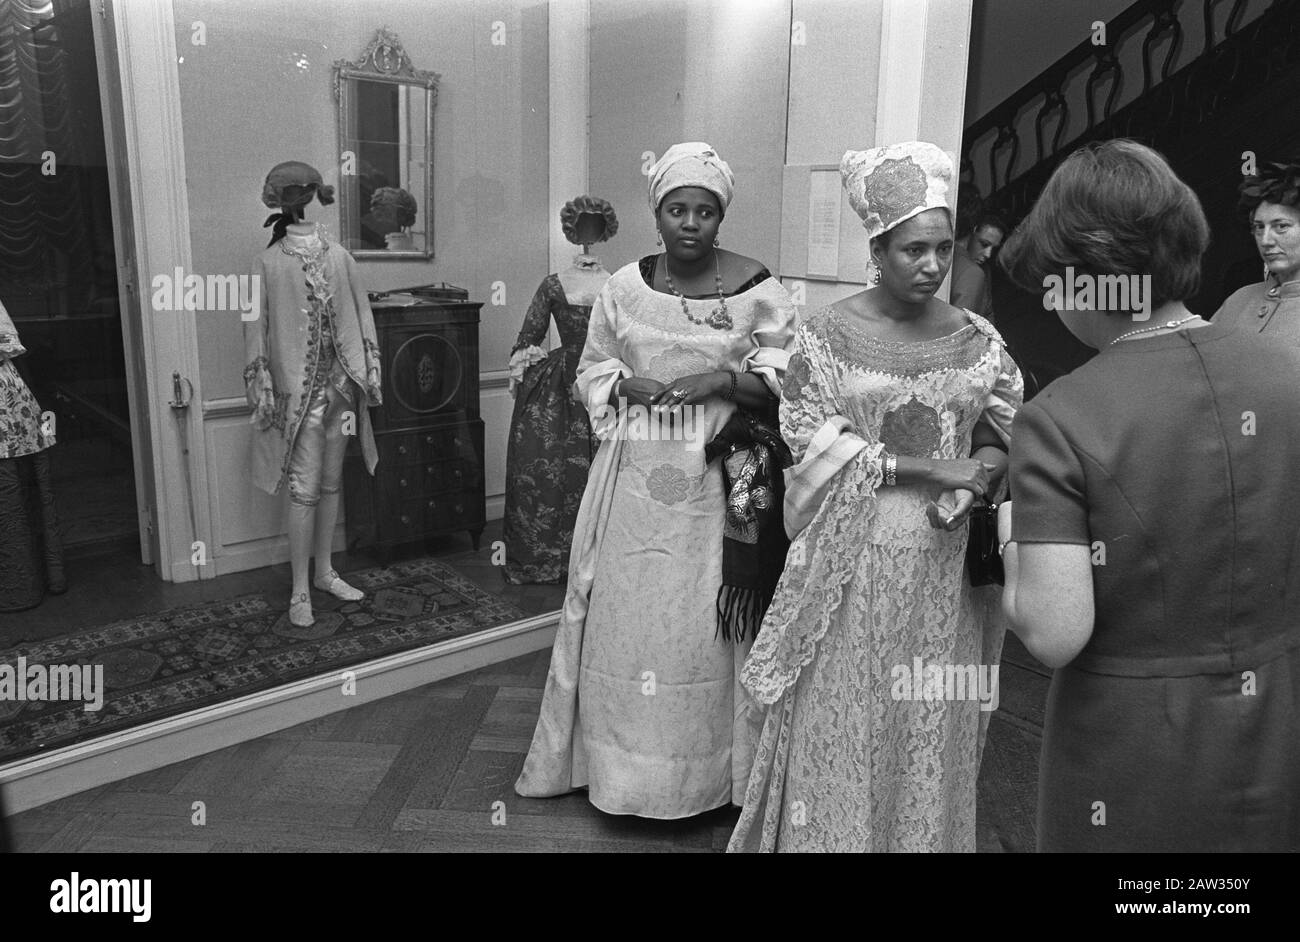 President of Niger for talks Rolzaal Hague, the wife of the President and the Minister during tour of museum Date: October 7, 1968 Location: The Hague, South Holland Keywords: wives, talks, museums, presidents, tours Stock Photo